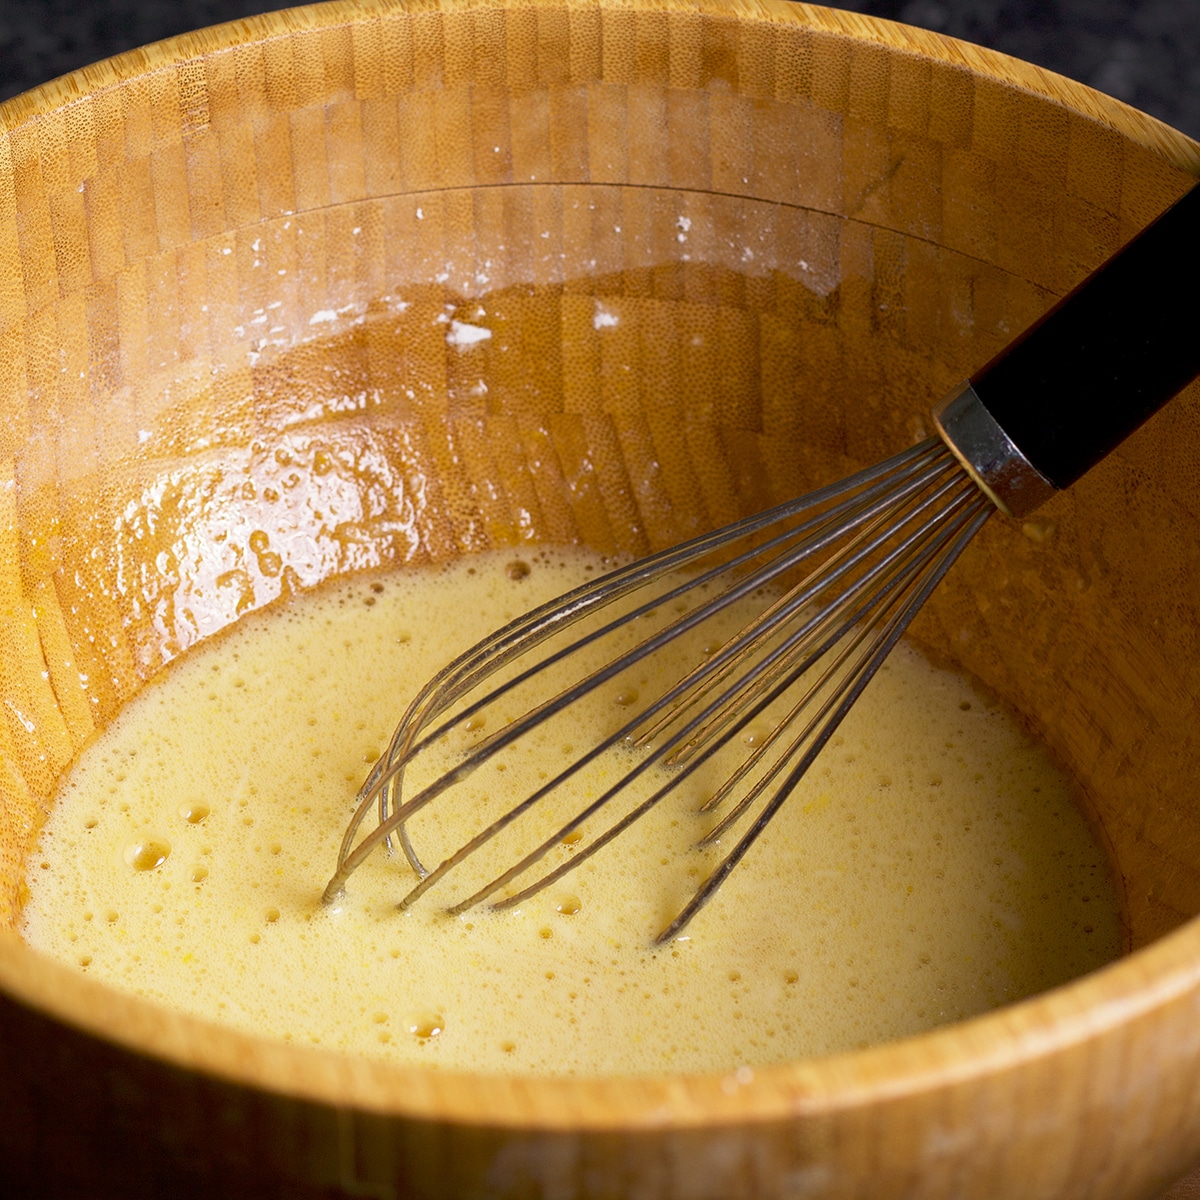 Whisking eggs, sugar, and flour in a wood bowl to make the batter for lemon bars.